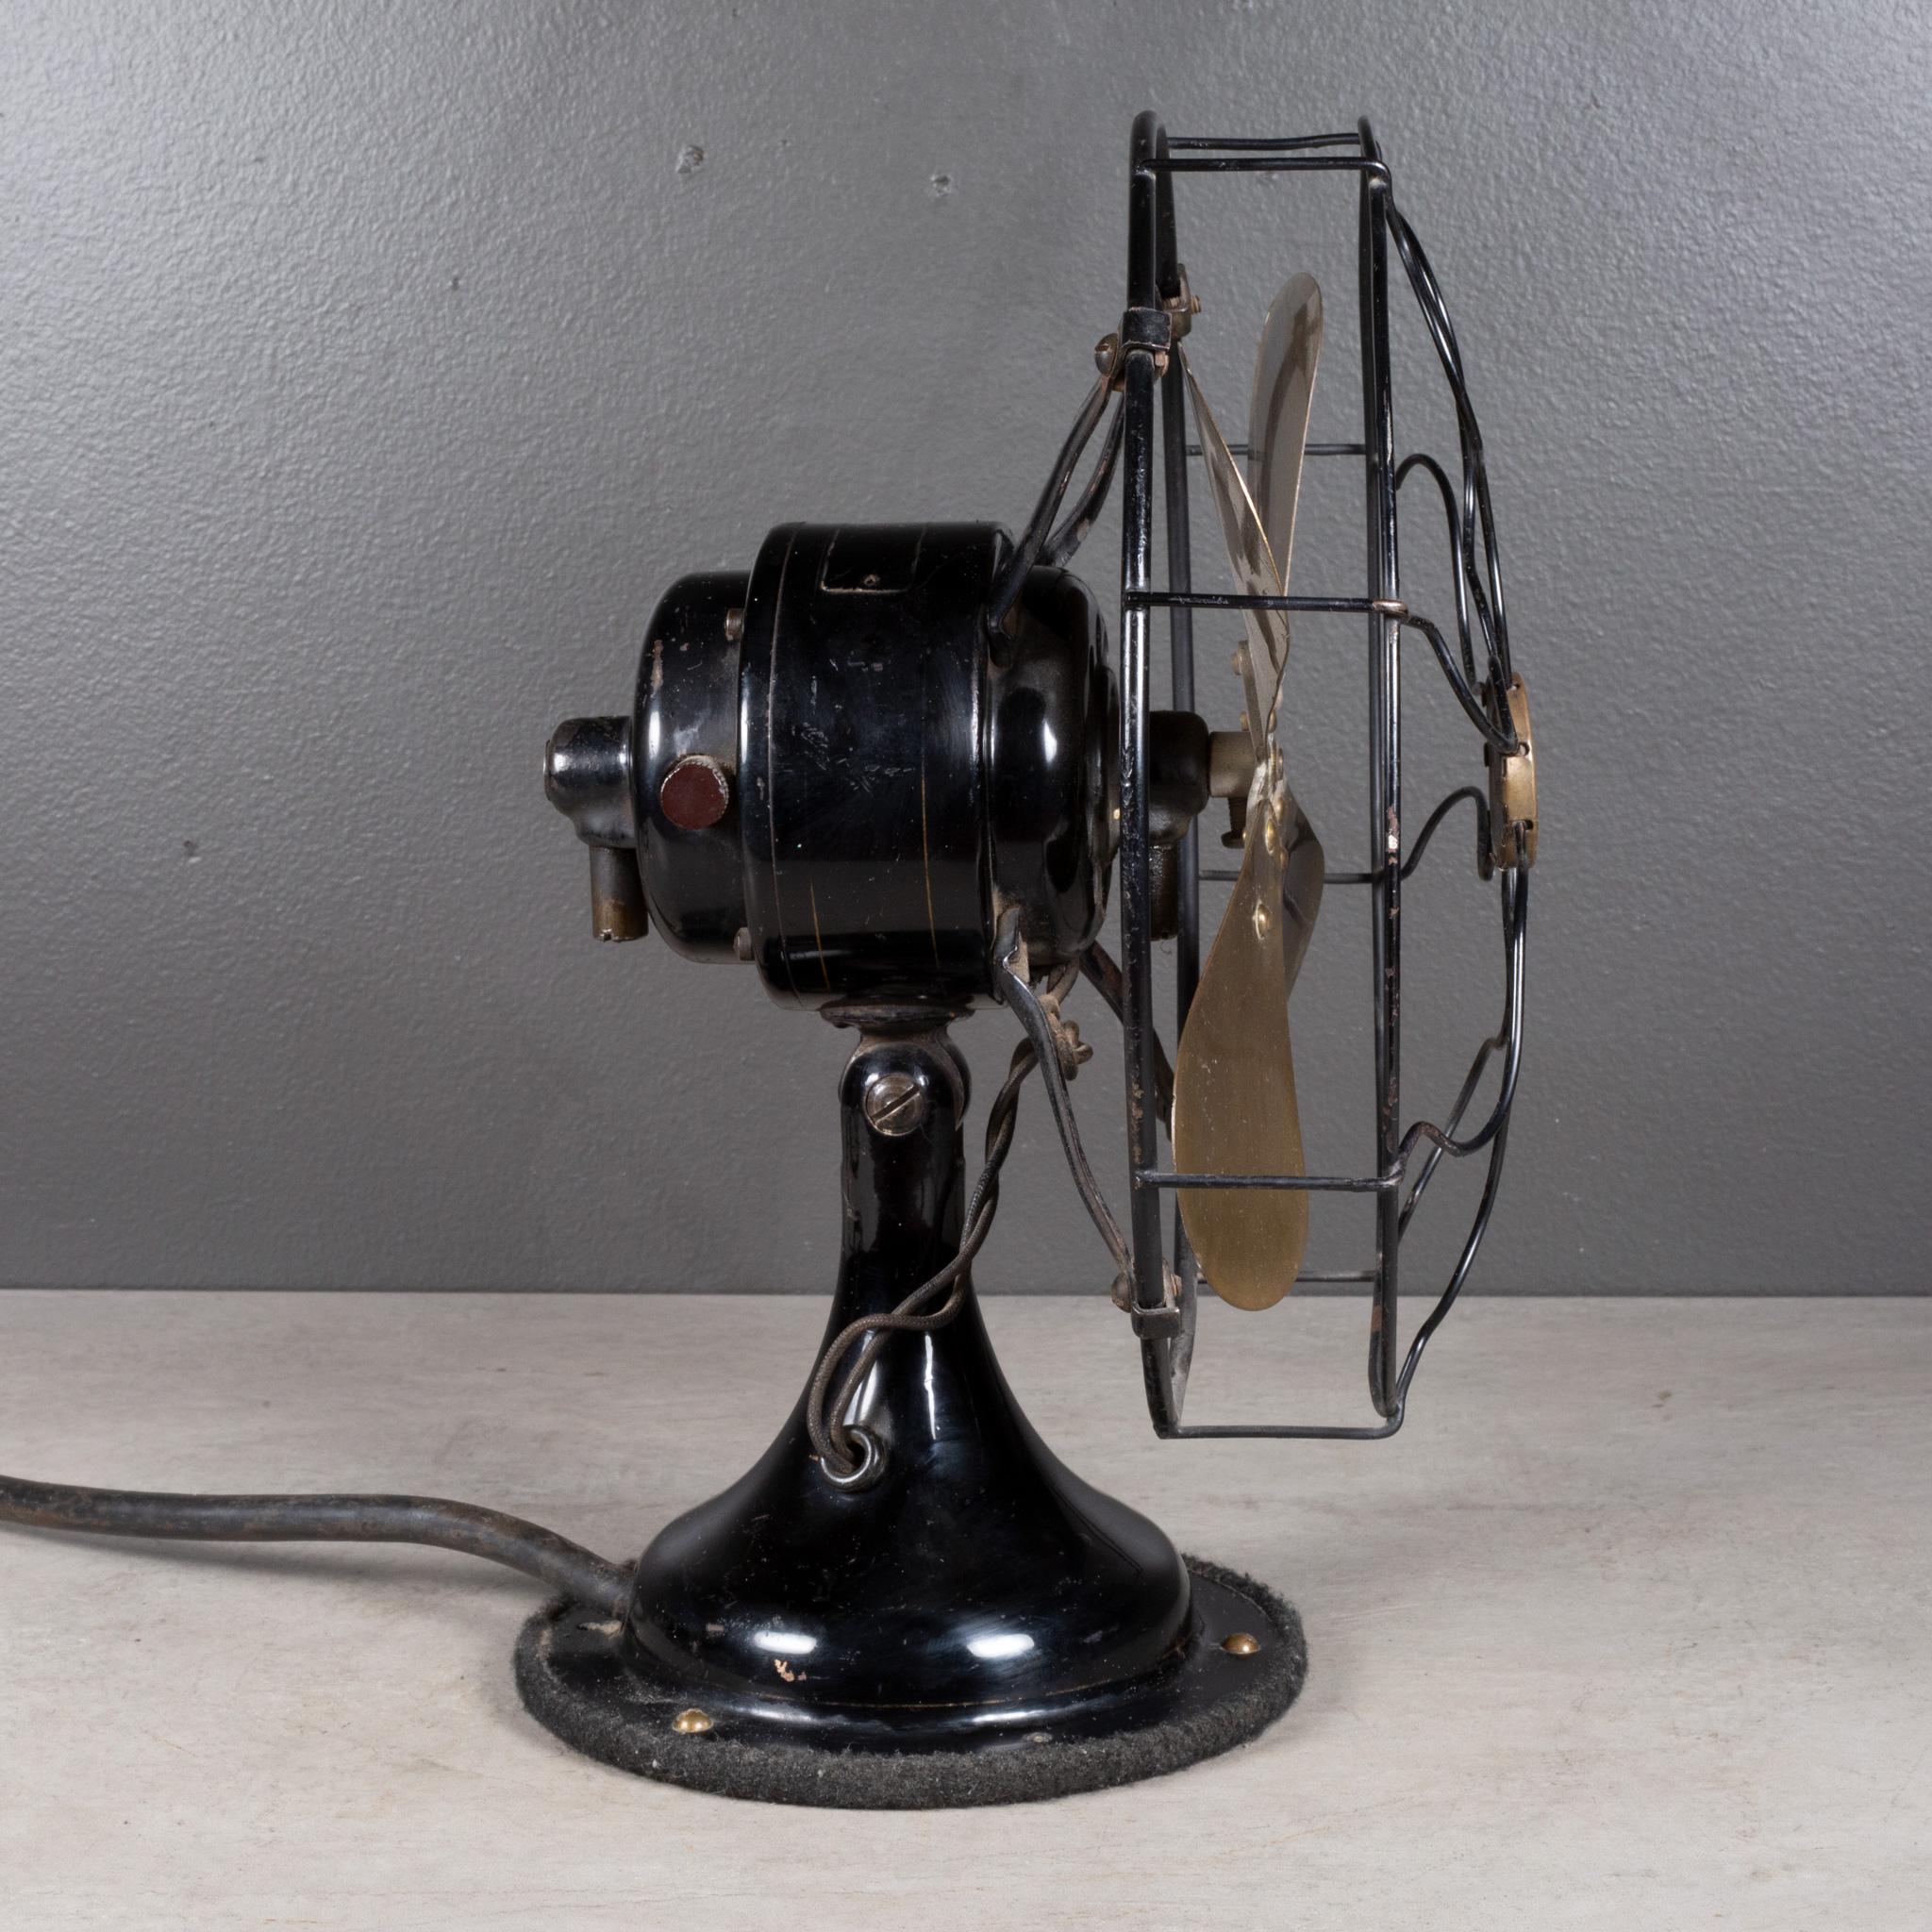 ABOUT

An original Western Electric metal fan with brass plated blades, tilting head, three power settings and original brass, front plate. High gloss black base. The wiring is good and the fan is in good working condition with quiet but powerful